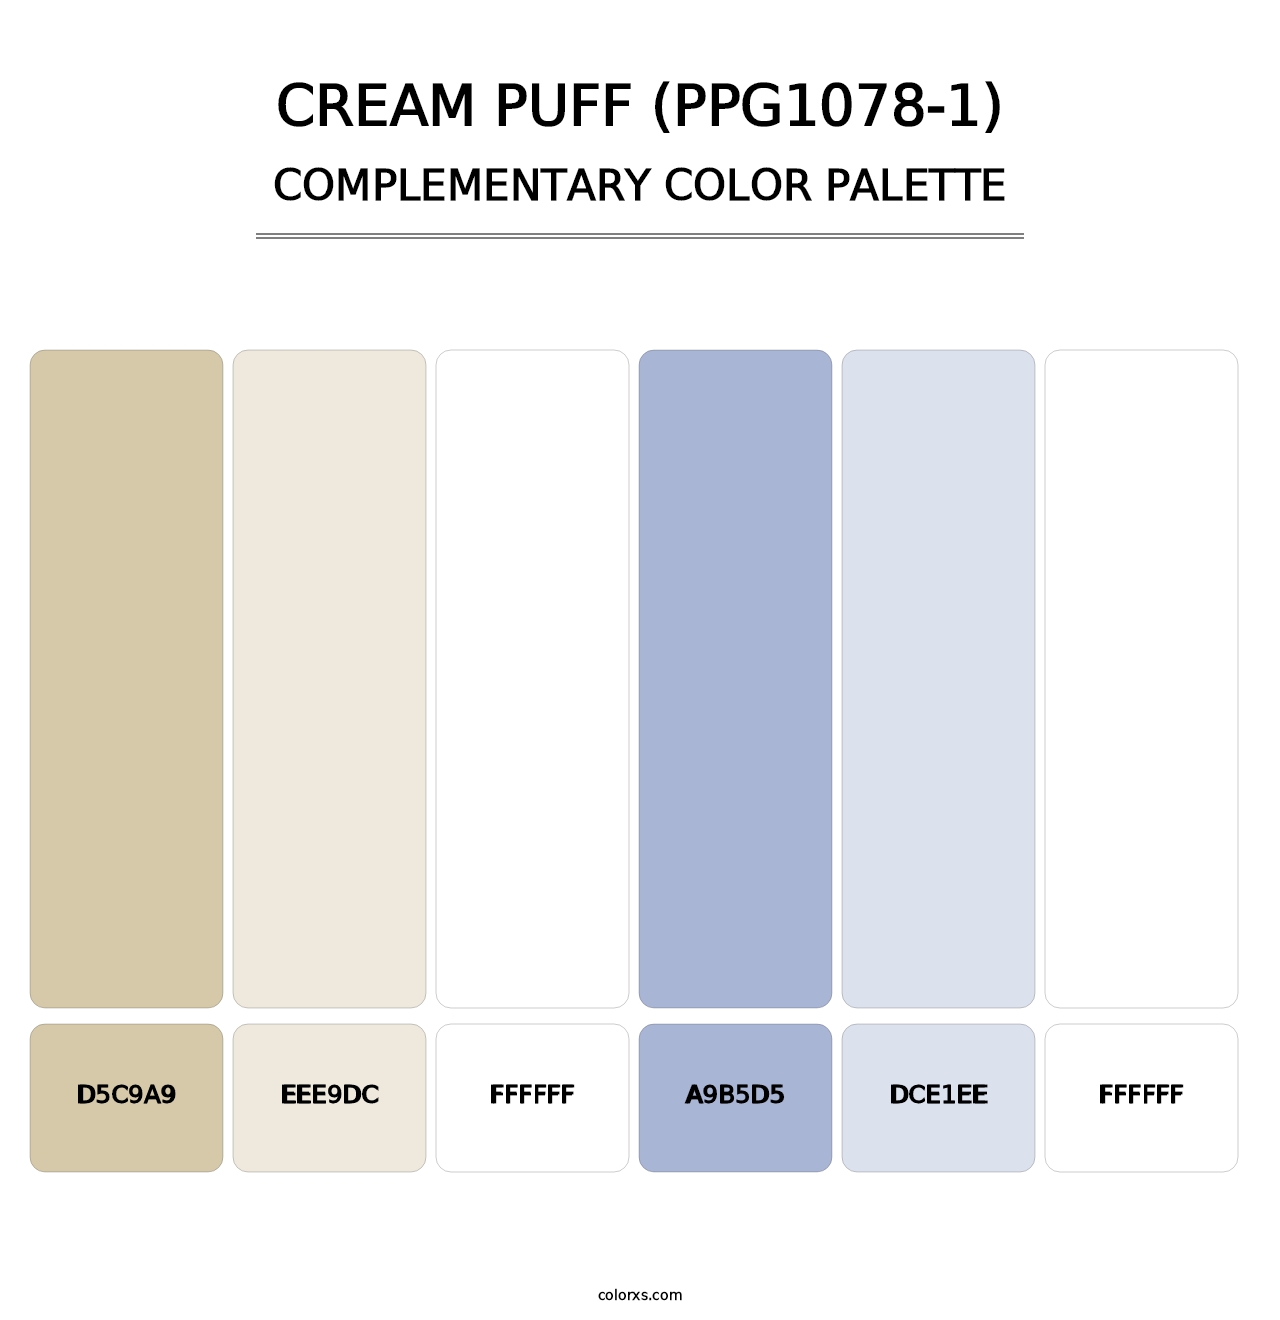 Cream Puff (PPG1078-1) - Complementary Color Palette